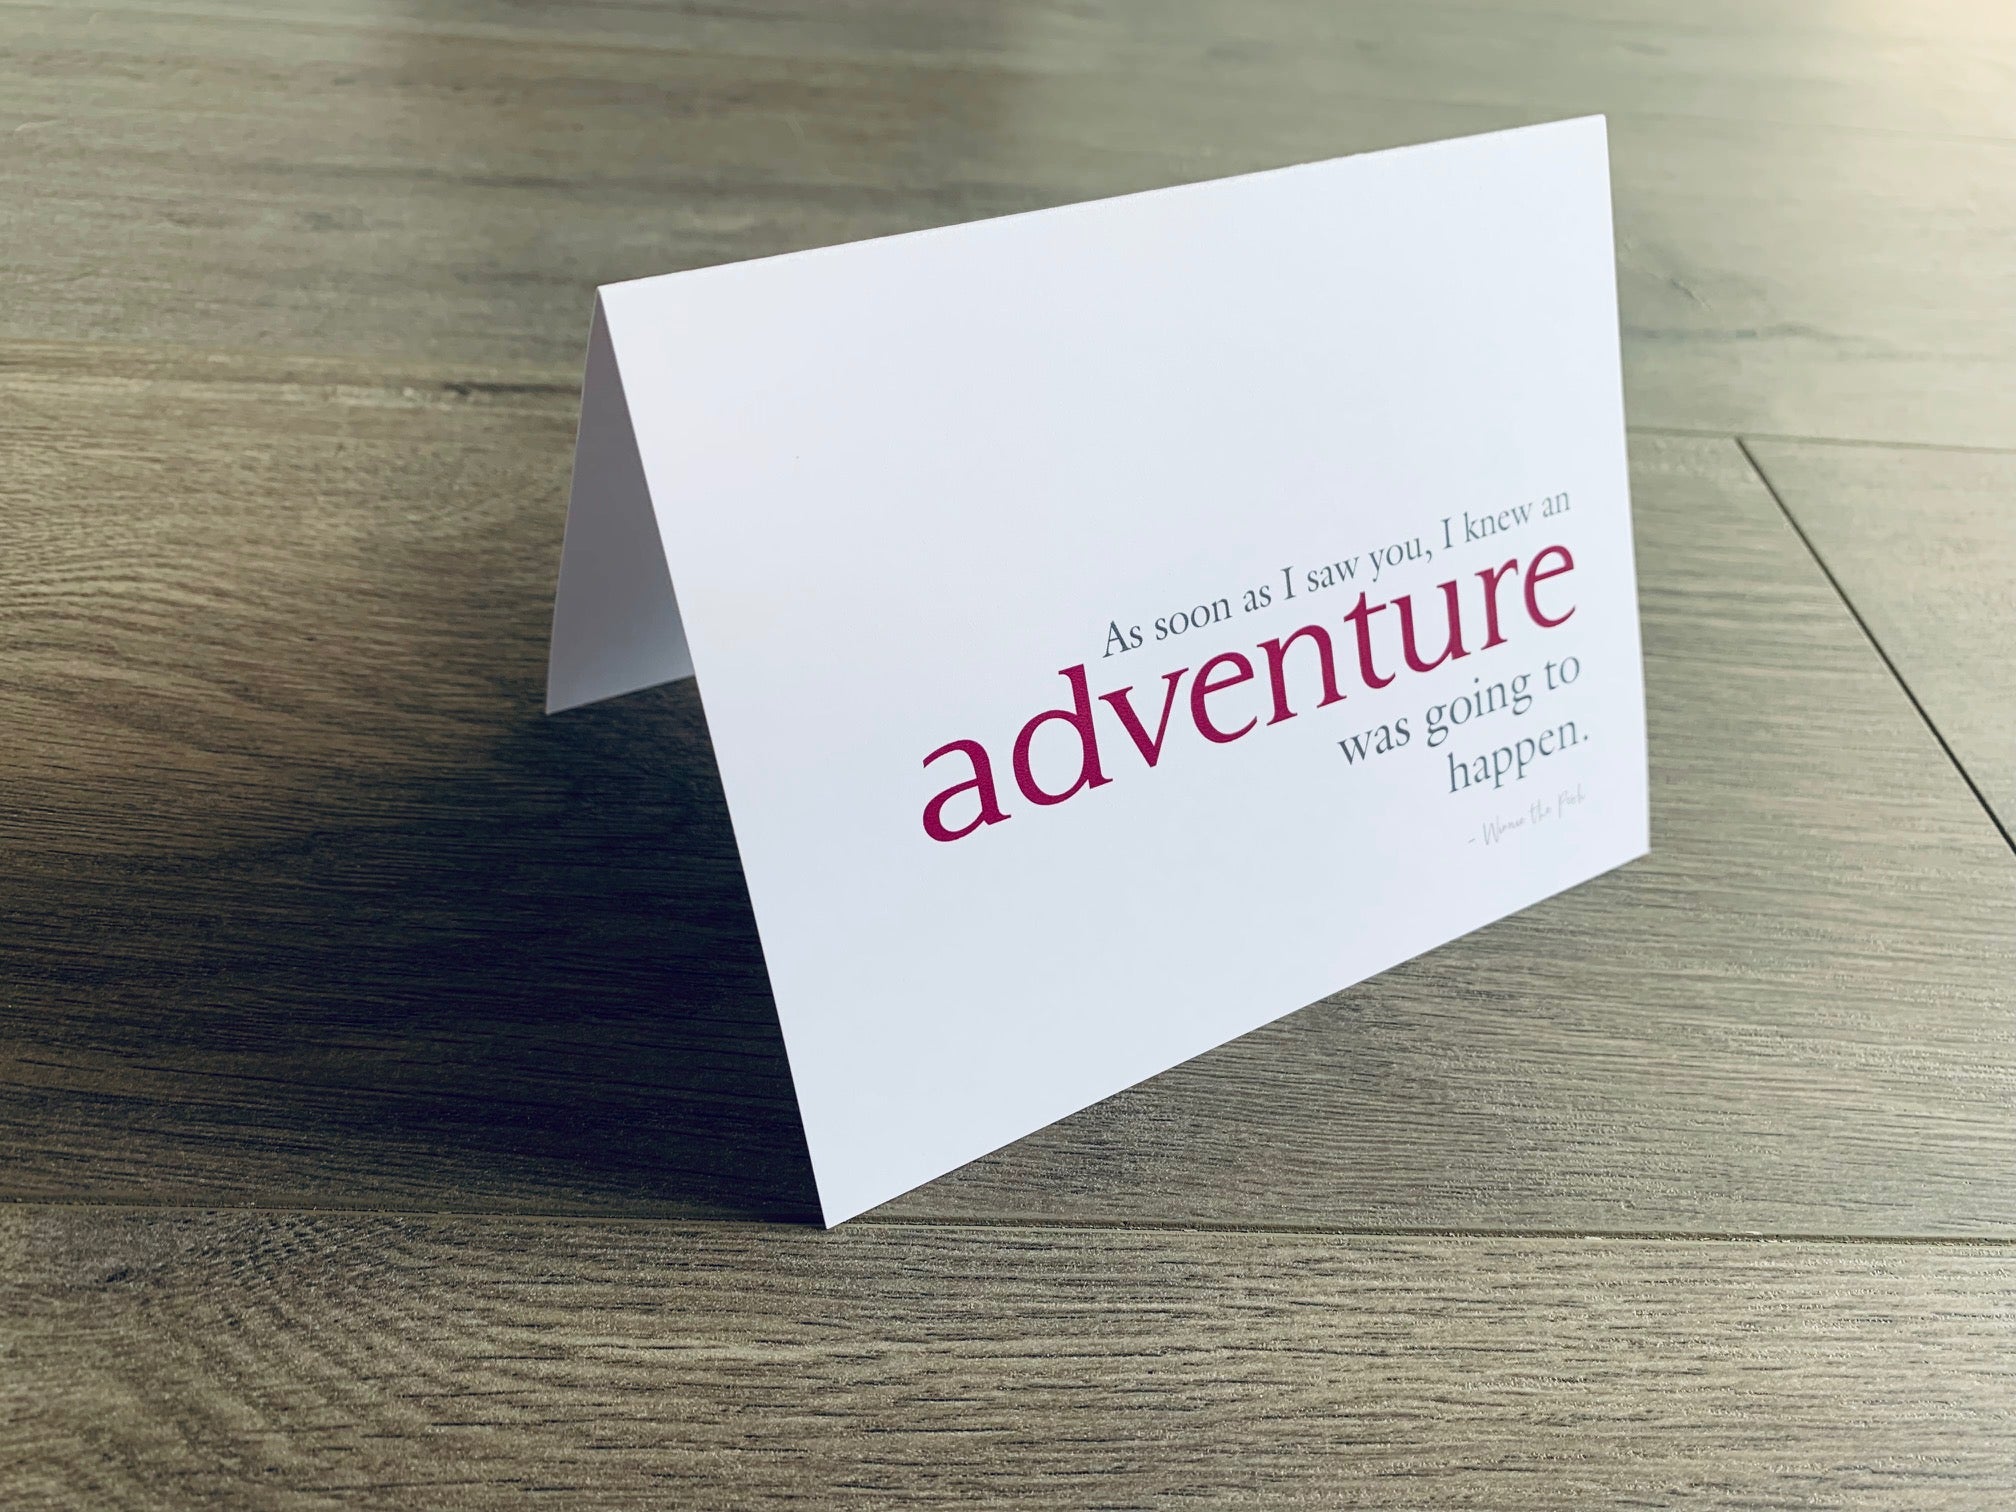 A white, folded notecard sits on a wooden floor. The card says, "As soon as I saw you, I knew an adventure was going to happen." The Friendship collection by Stationare.